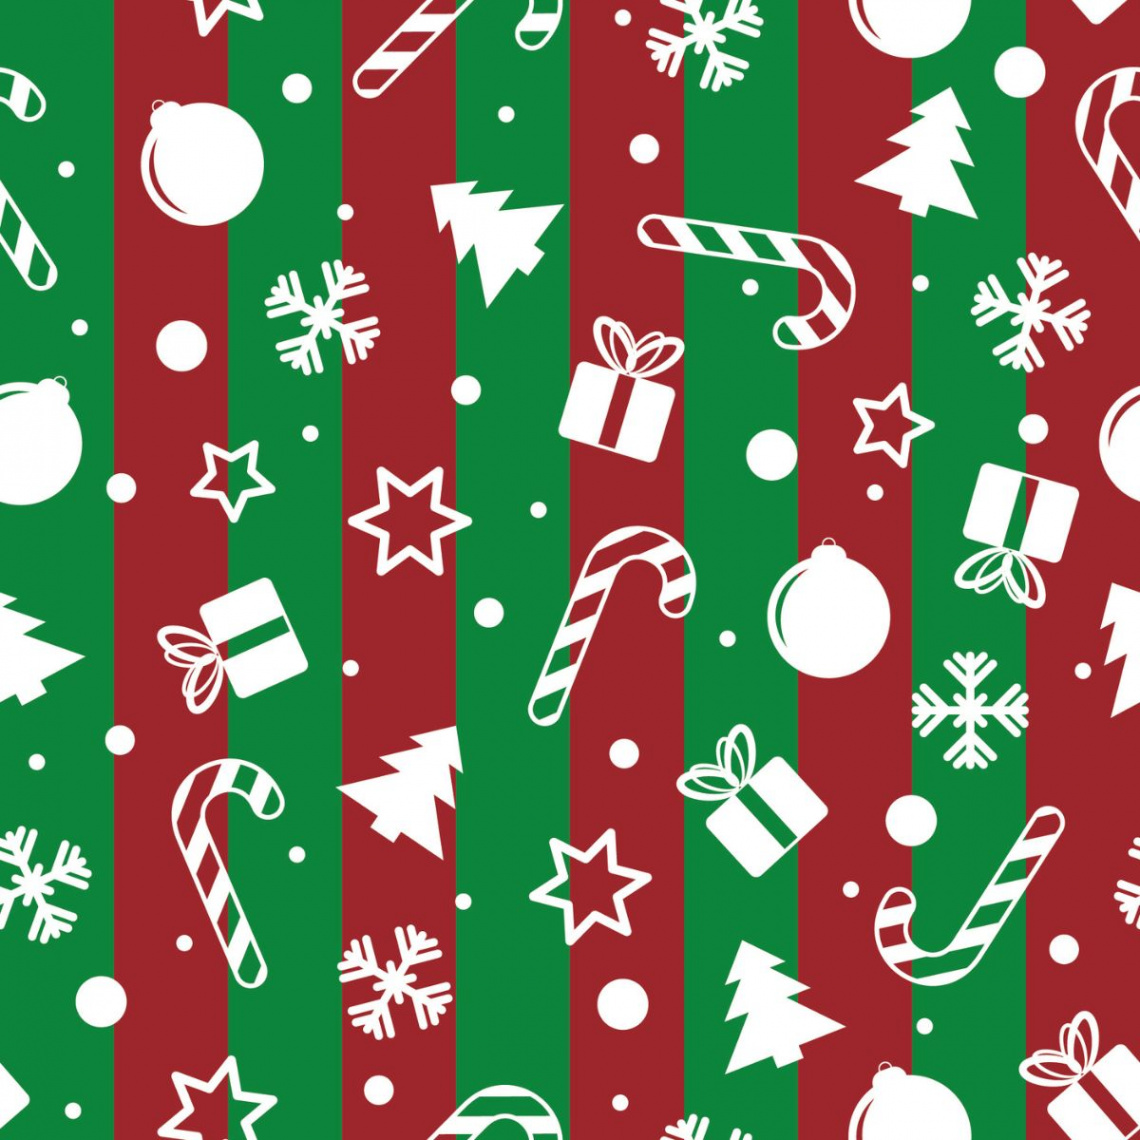 Christmas Icons With Red Green Stripes Decor Wallpaper - Magic Decor ®